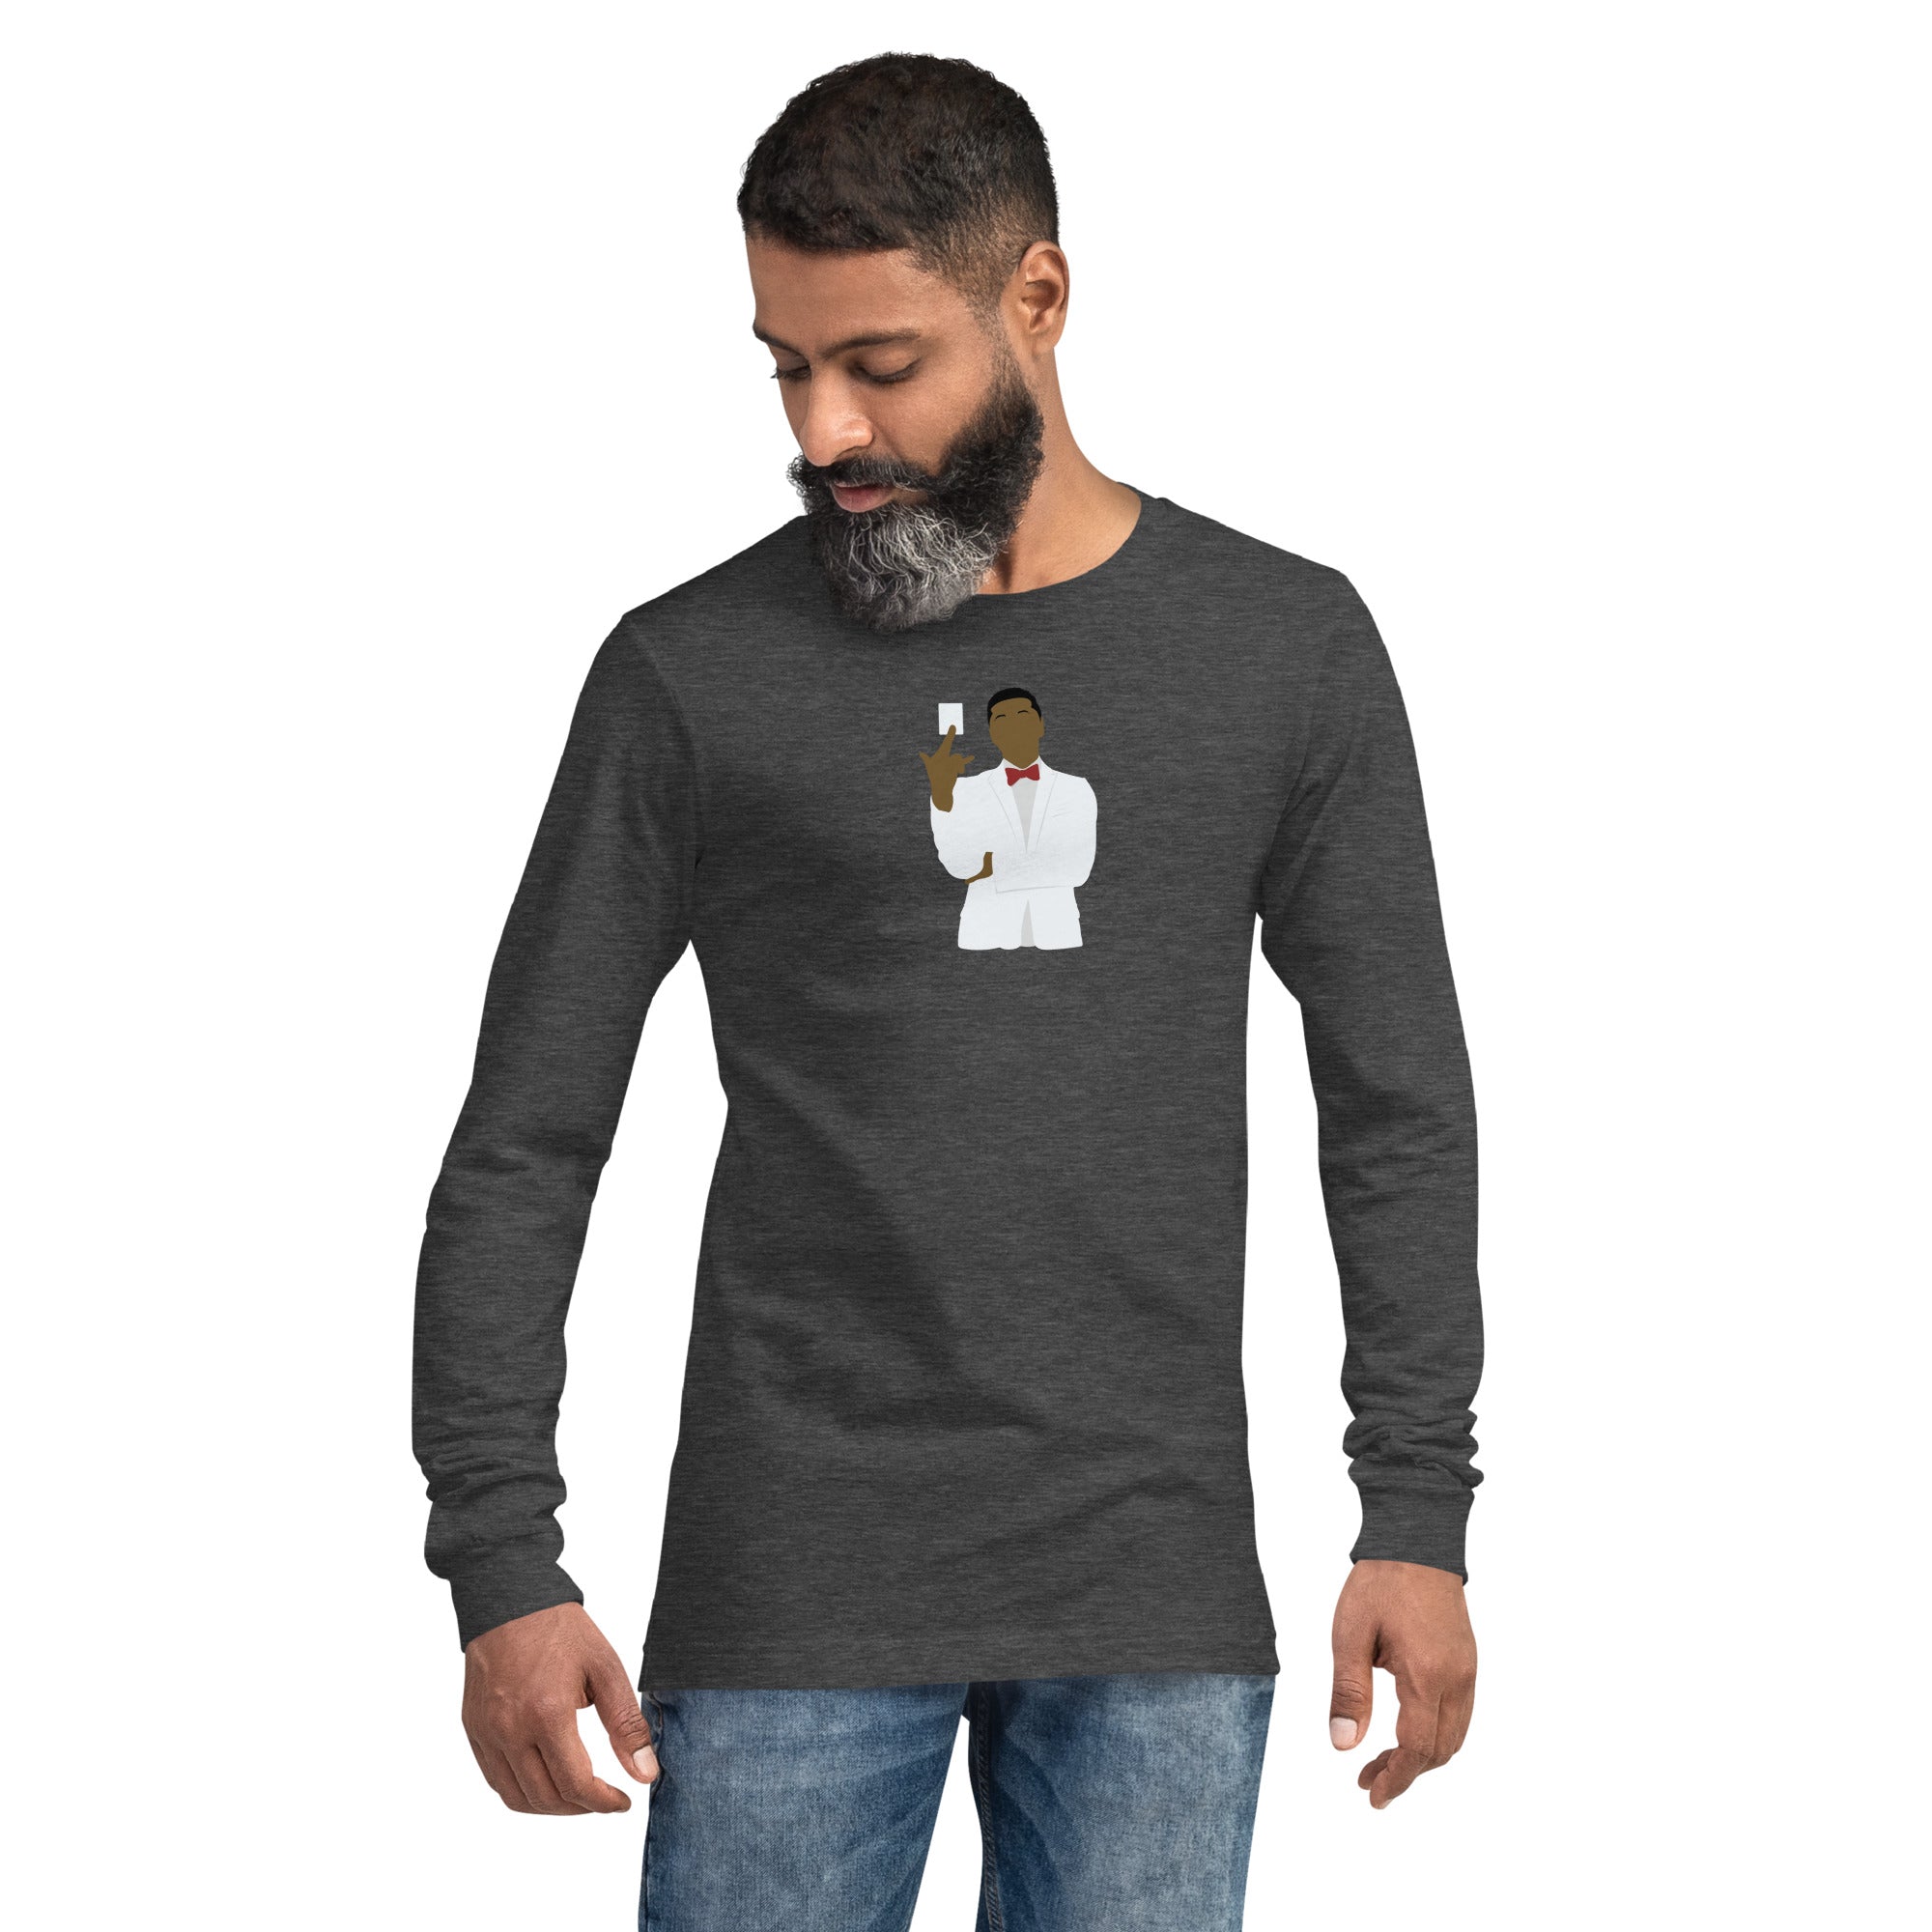 "Exactly How It's `Posed to Be" Small Logo Unisex Long Sleeve T-Shirt